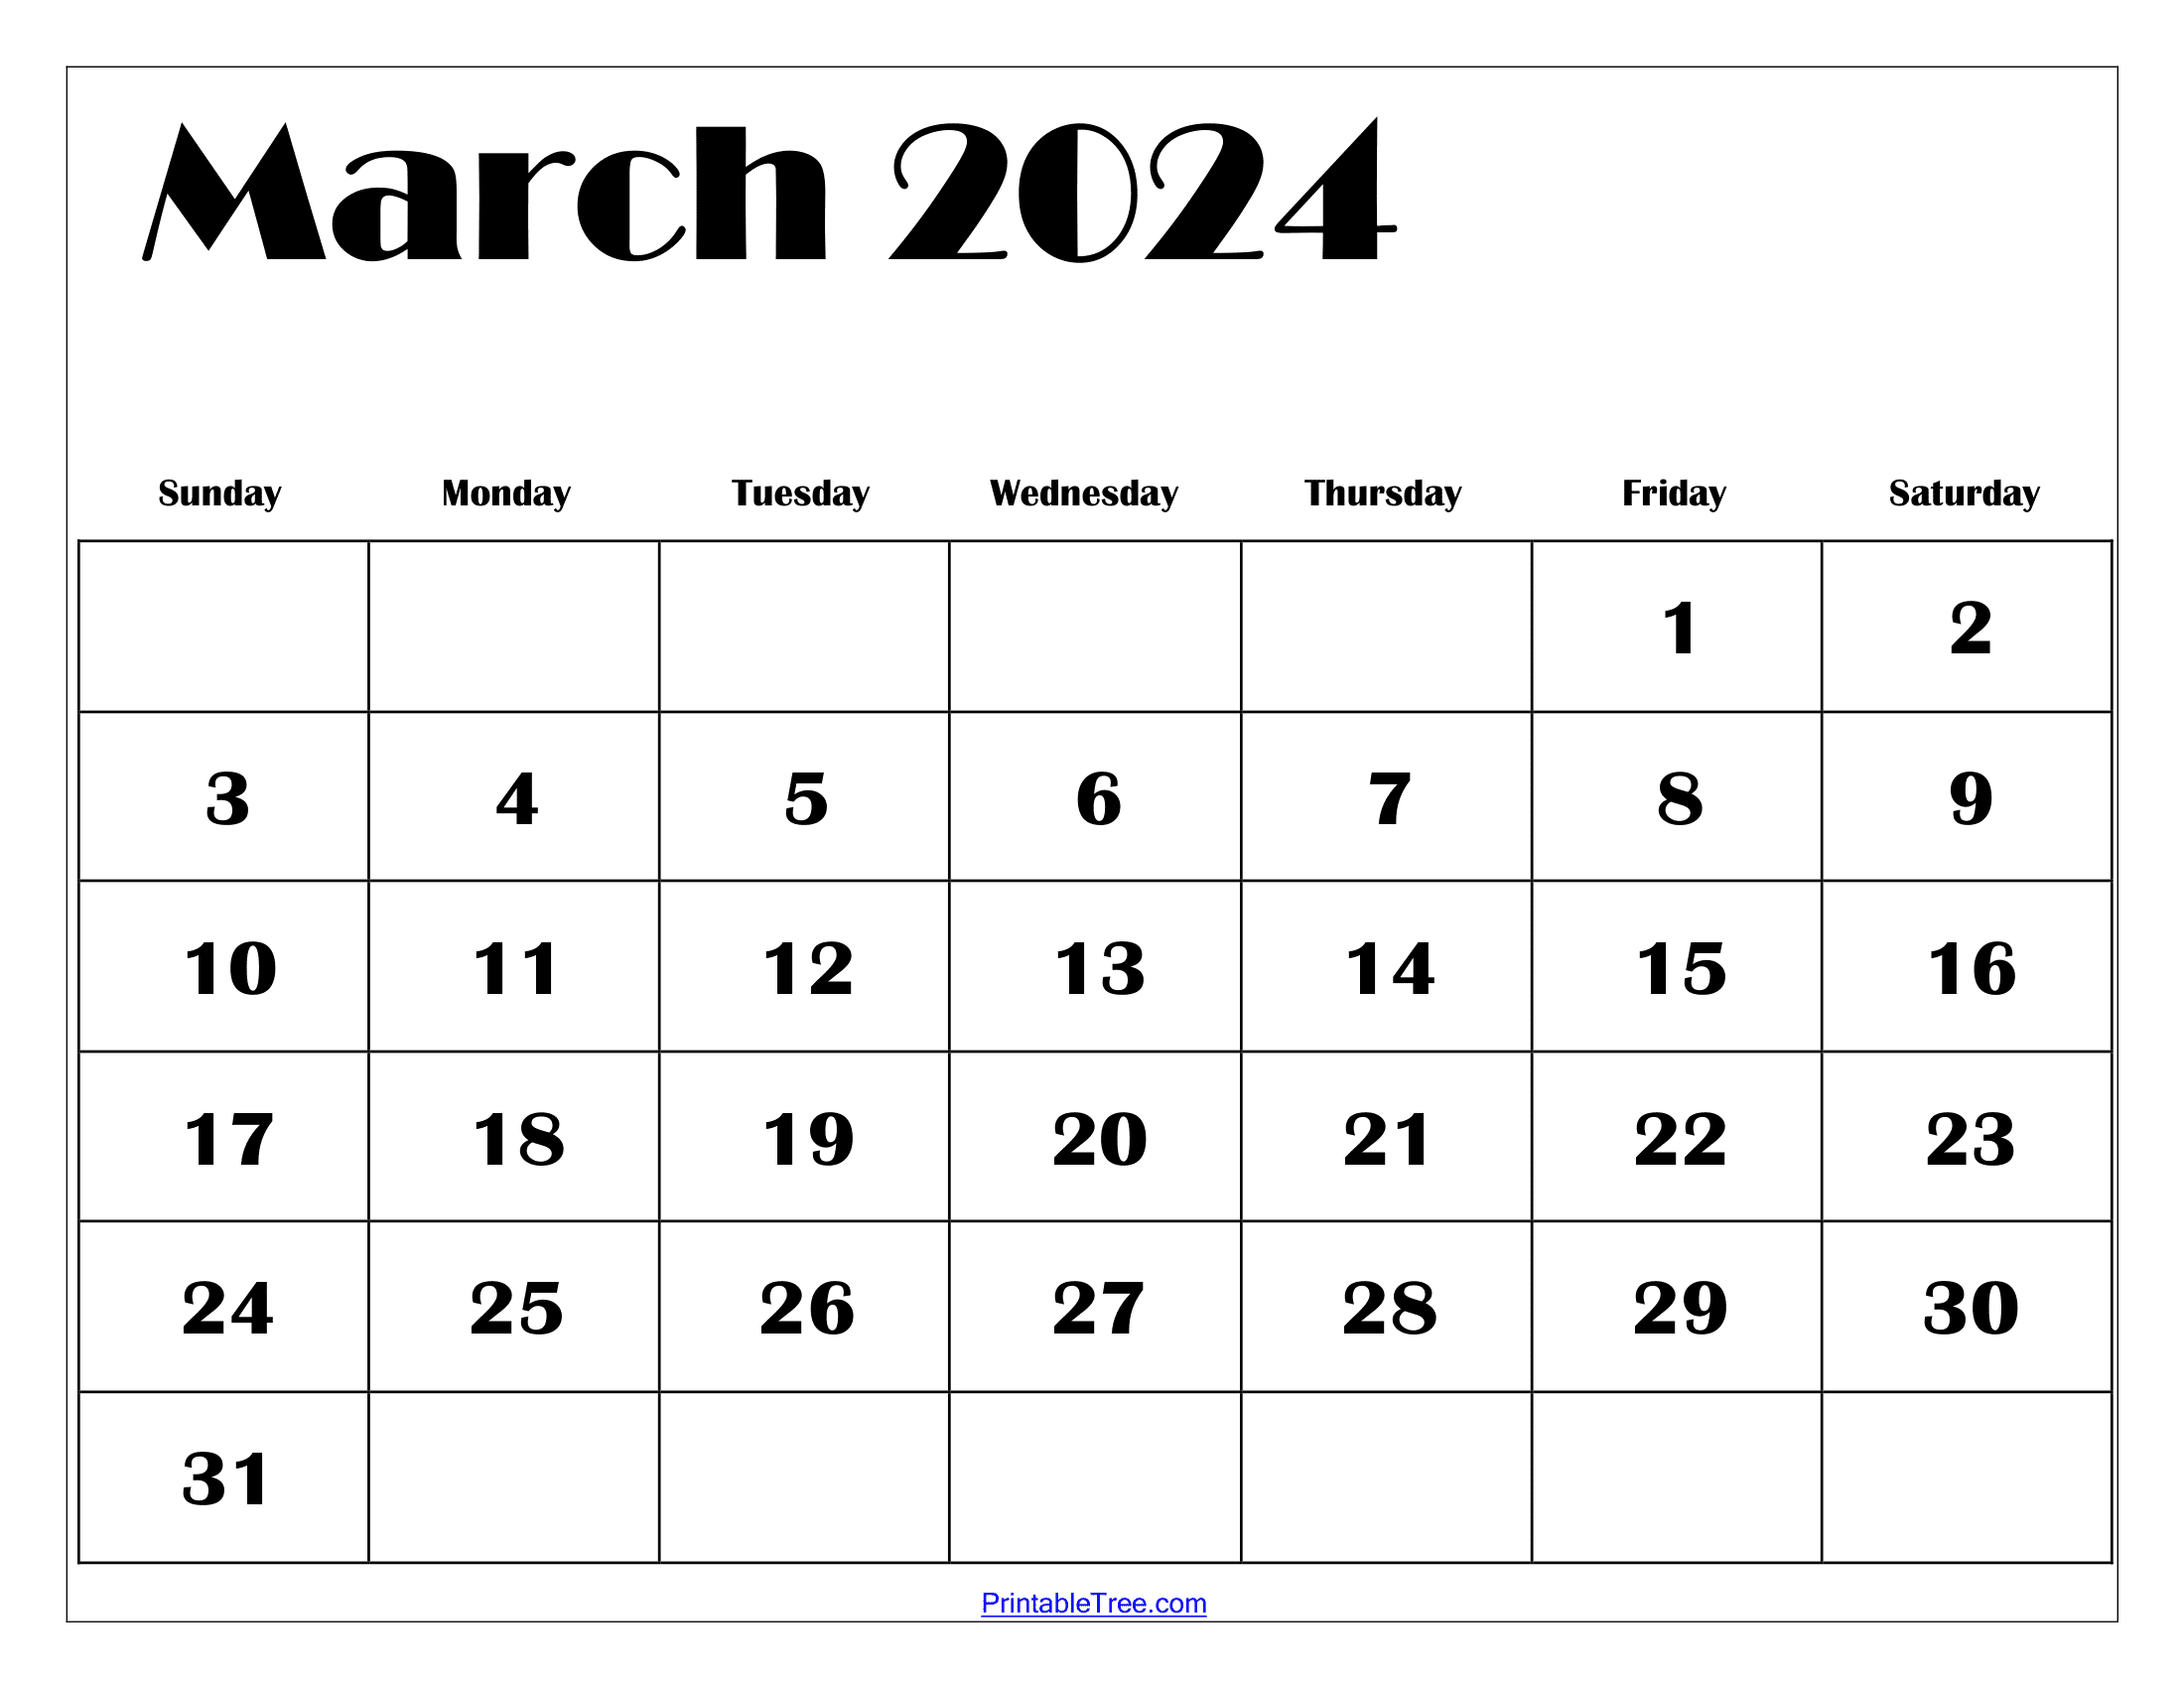 March 2024 Calendar Printable Pdf With Holidays Template Free for Calendar 2024 Printable Free March